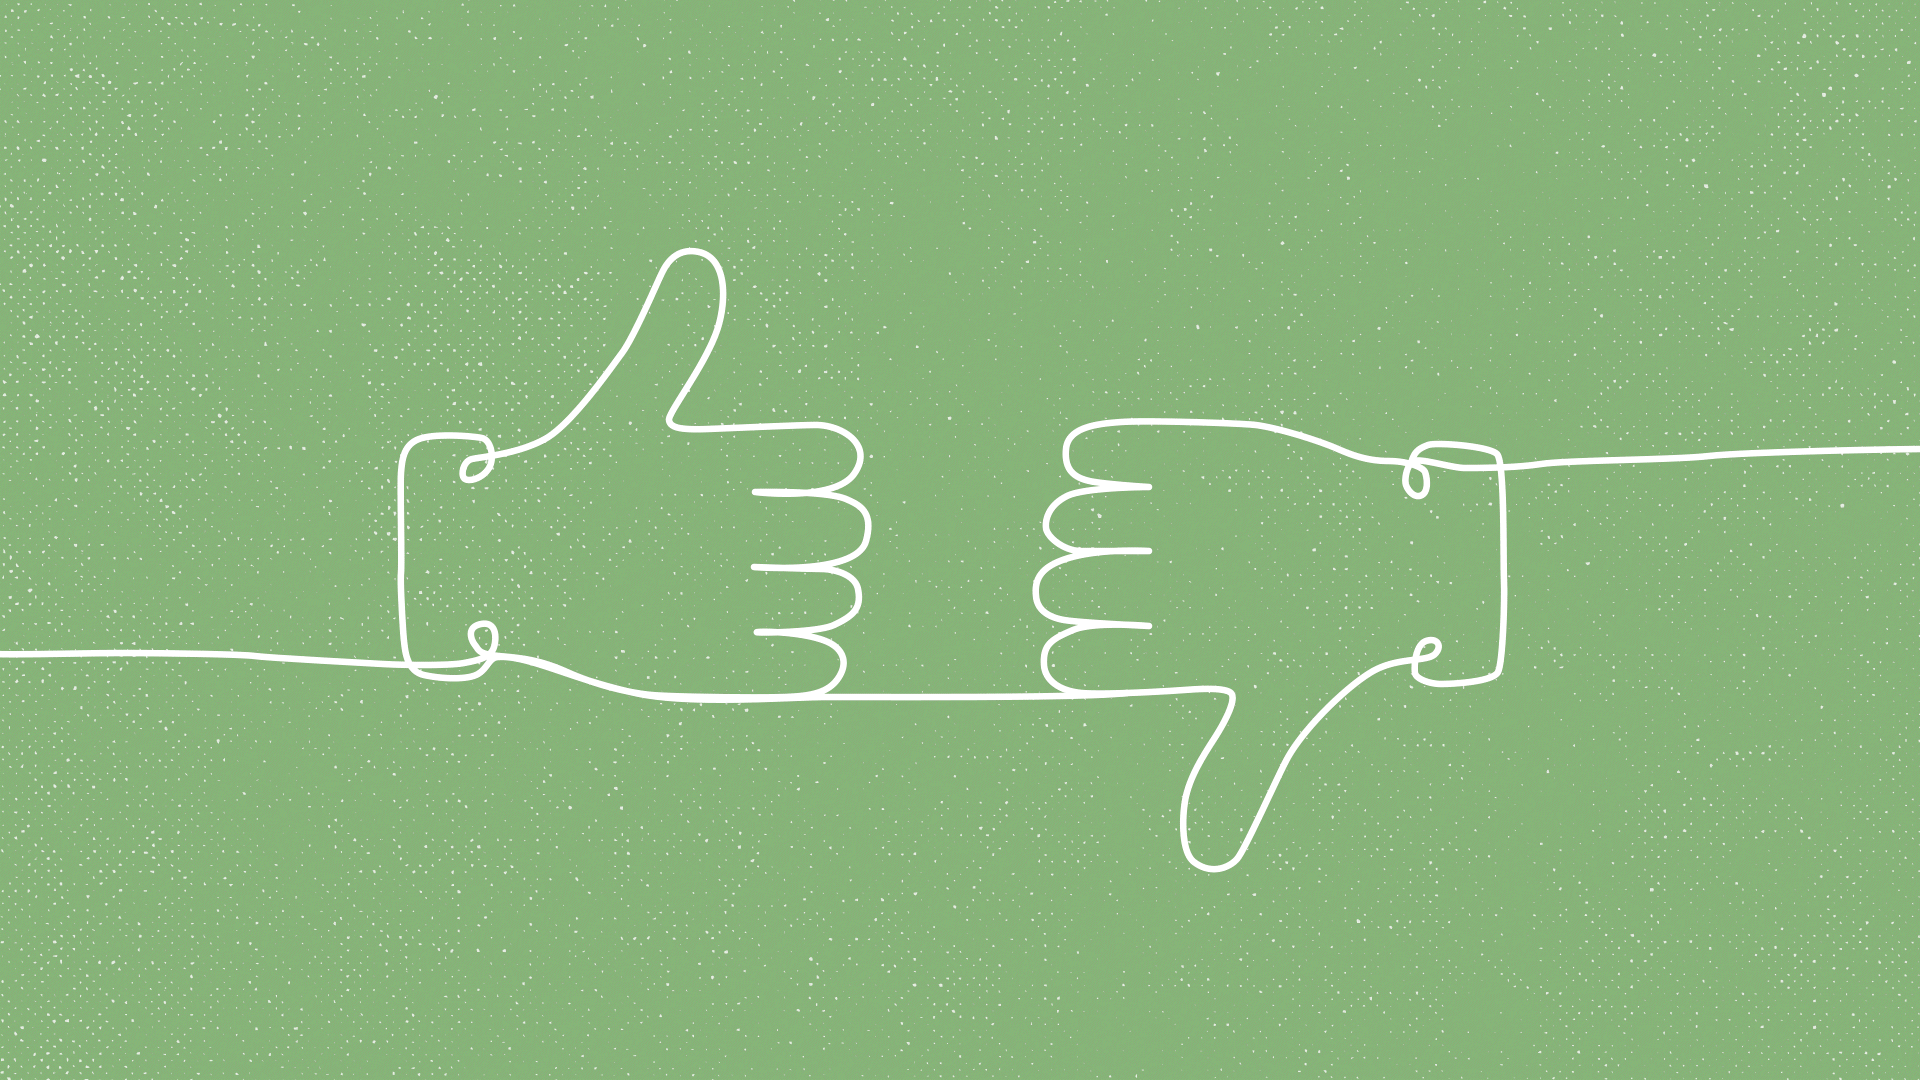 A GIF of hands doing thumbs up and thumbs down on a light green background